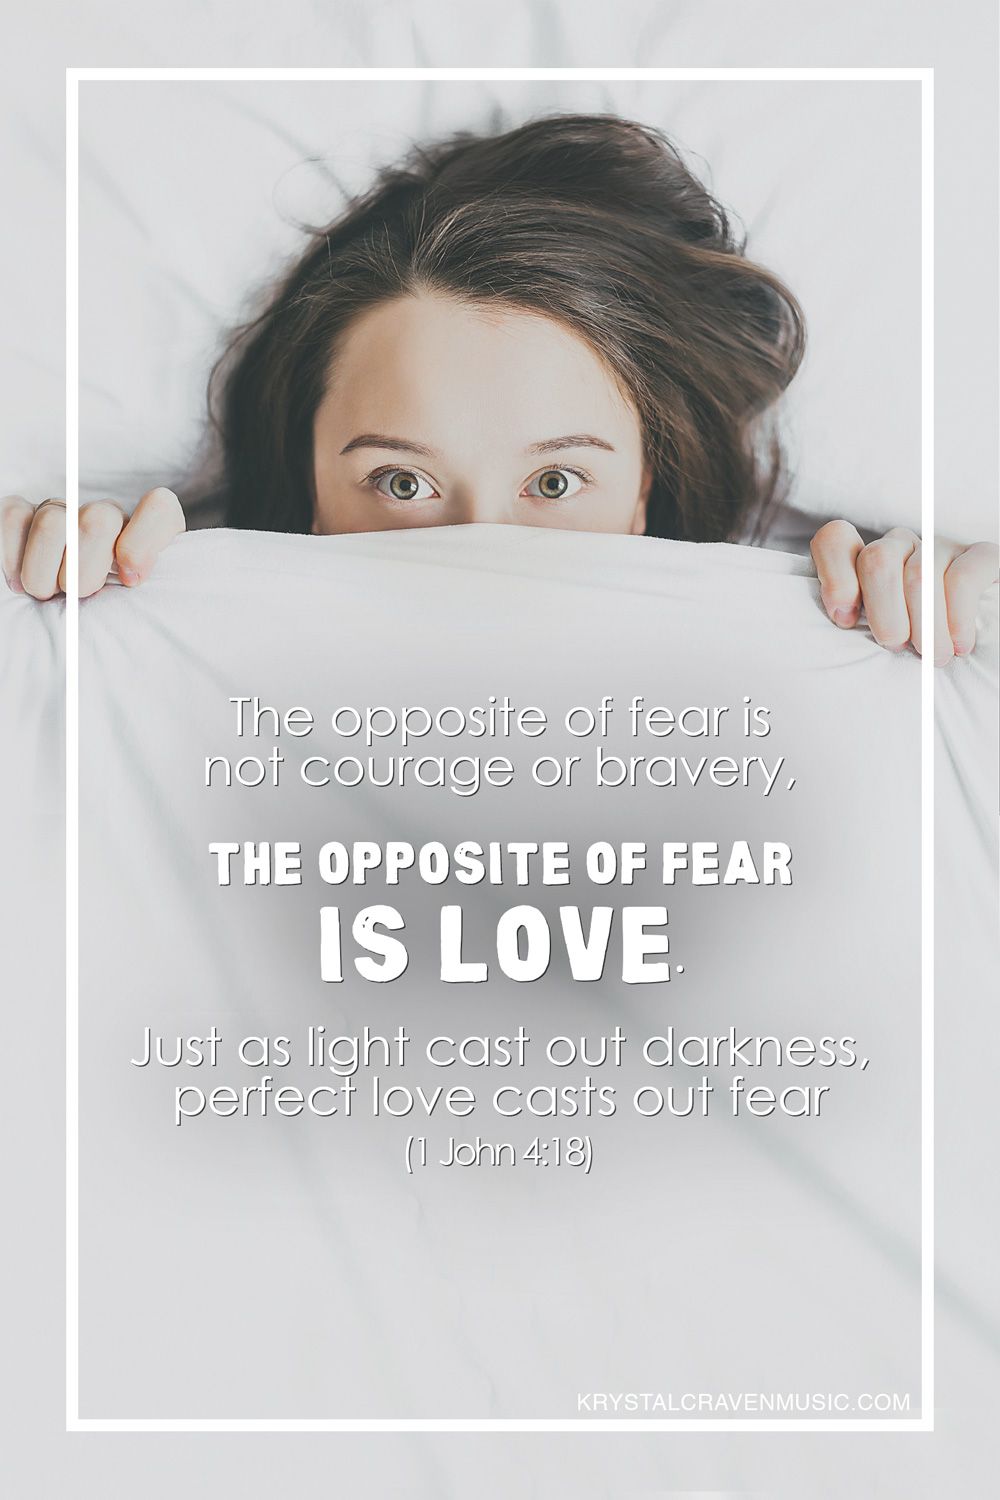 The text of "The opposite of fear is not courage or bravery, the opposite of fear is love. Just as light casts out darkness, perfect love casts out fear (1 John 4:18)". The text is overlaying a woman laying in bed holding the top sheet over part of her face so that only her eyes up are seen, and she has a scared look in her eyes.